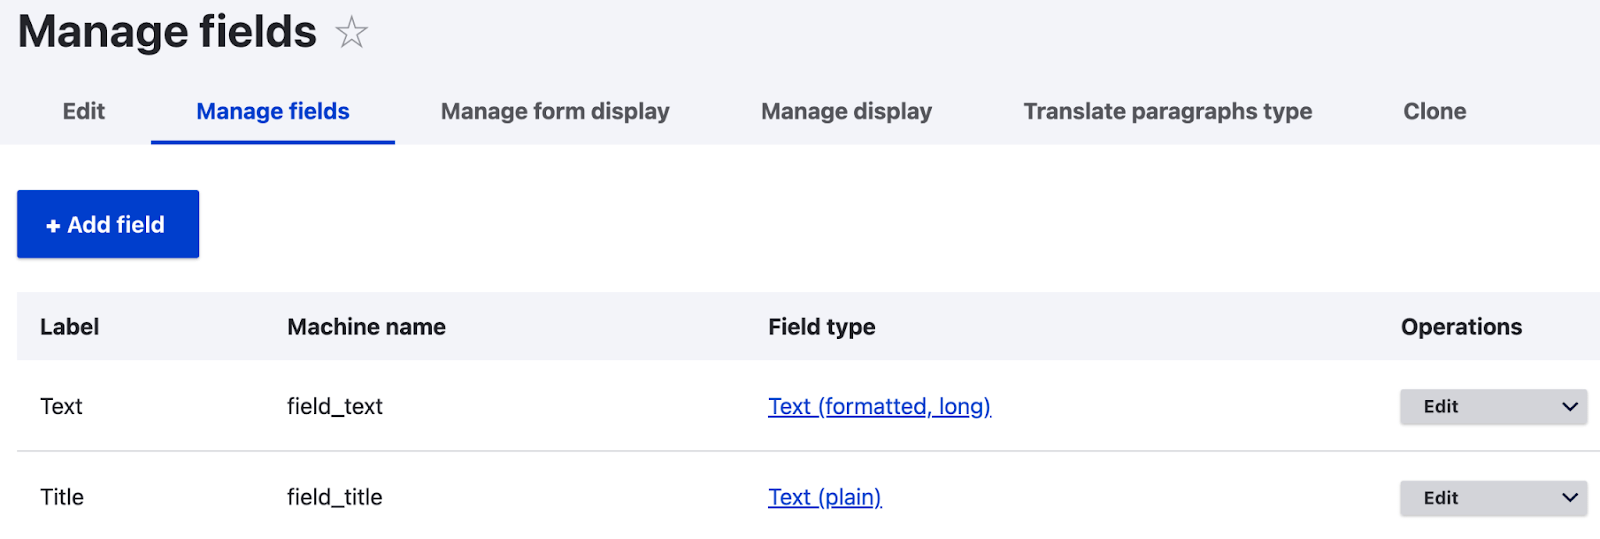 manage field